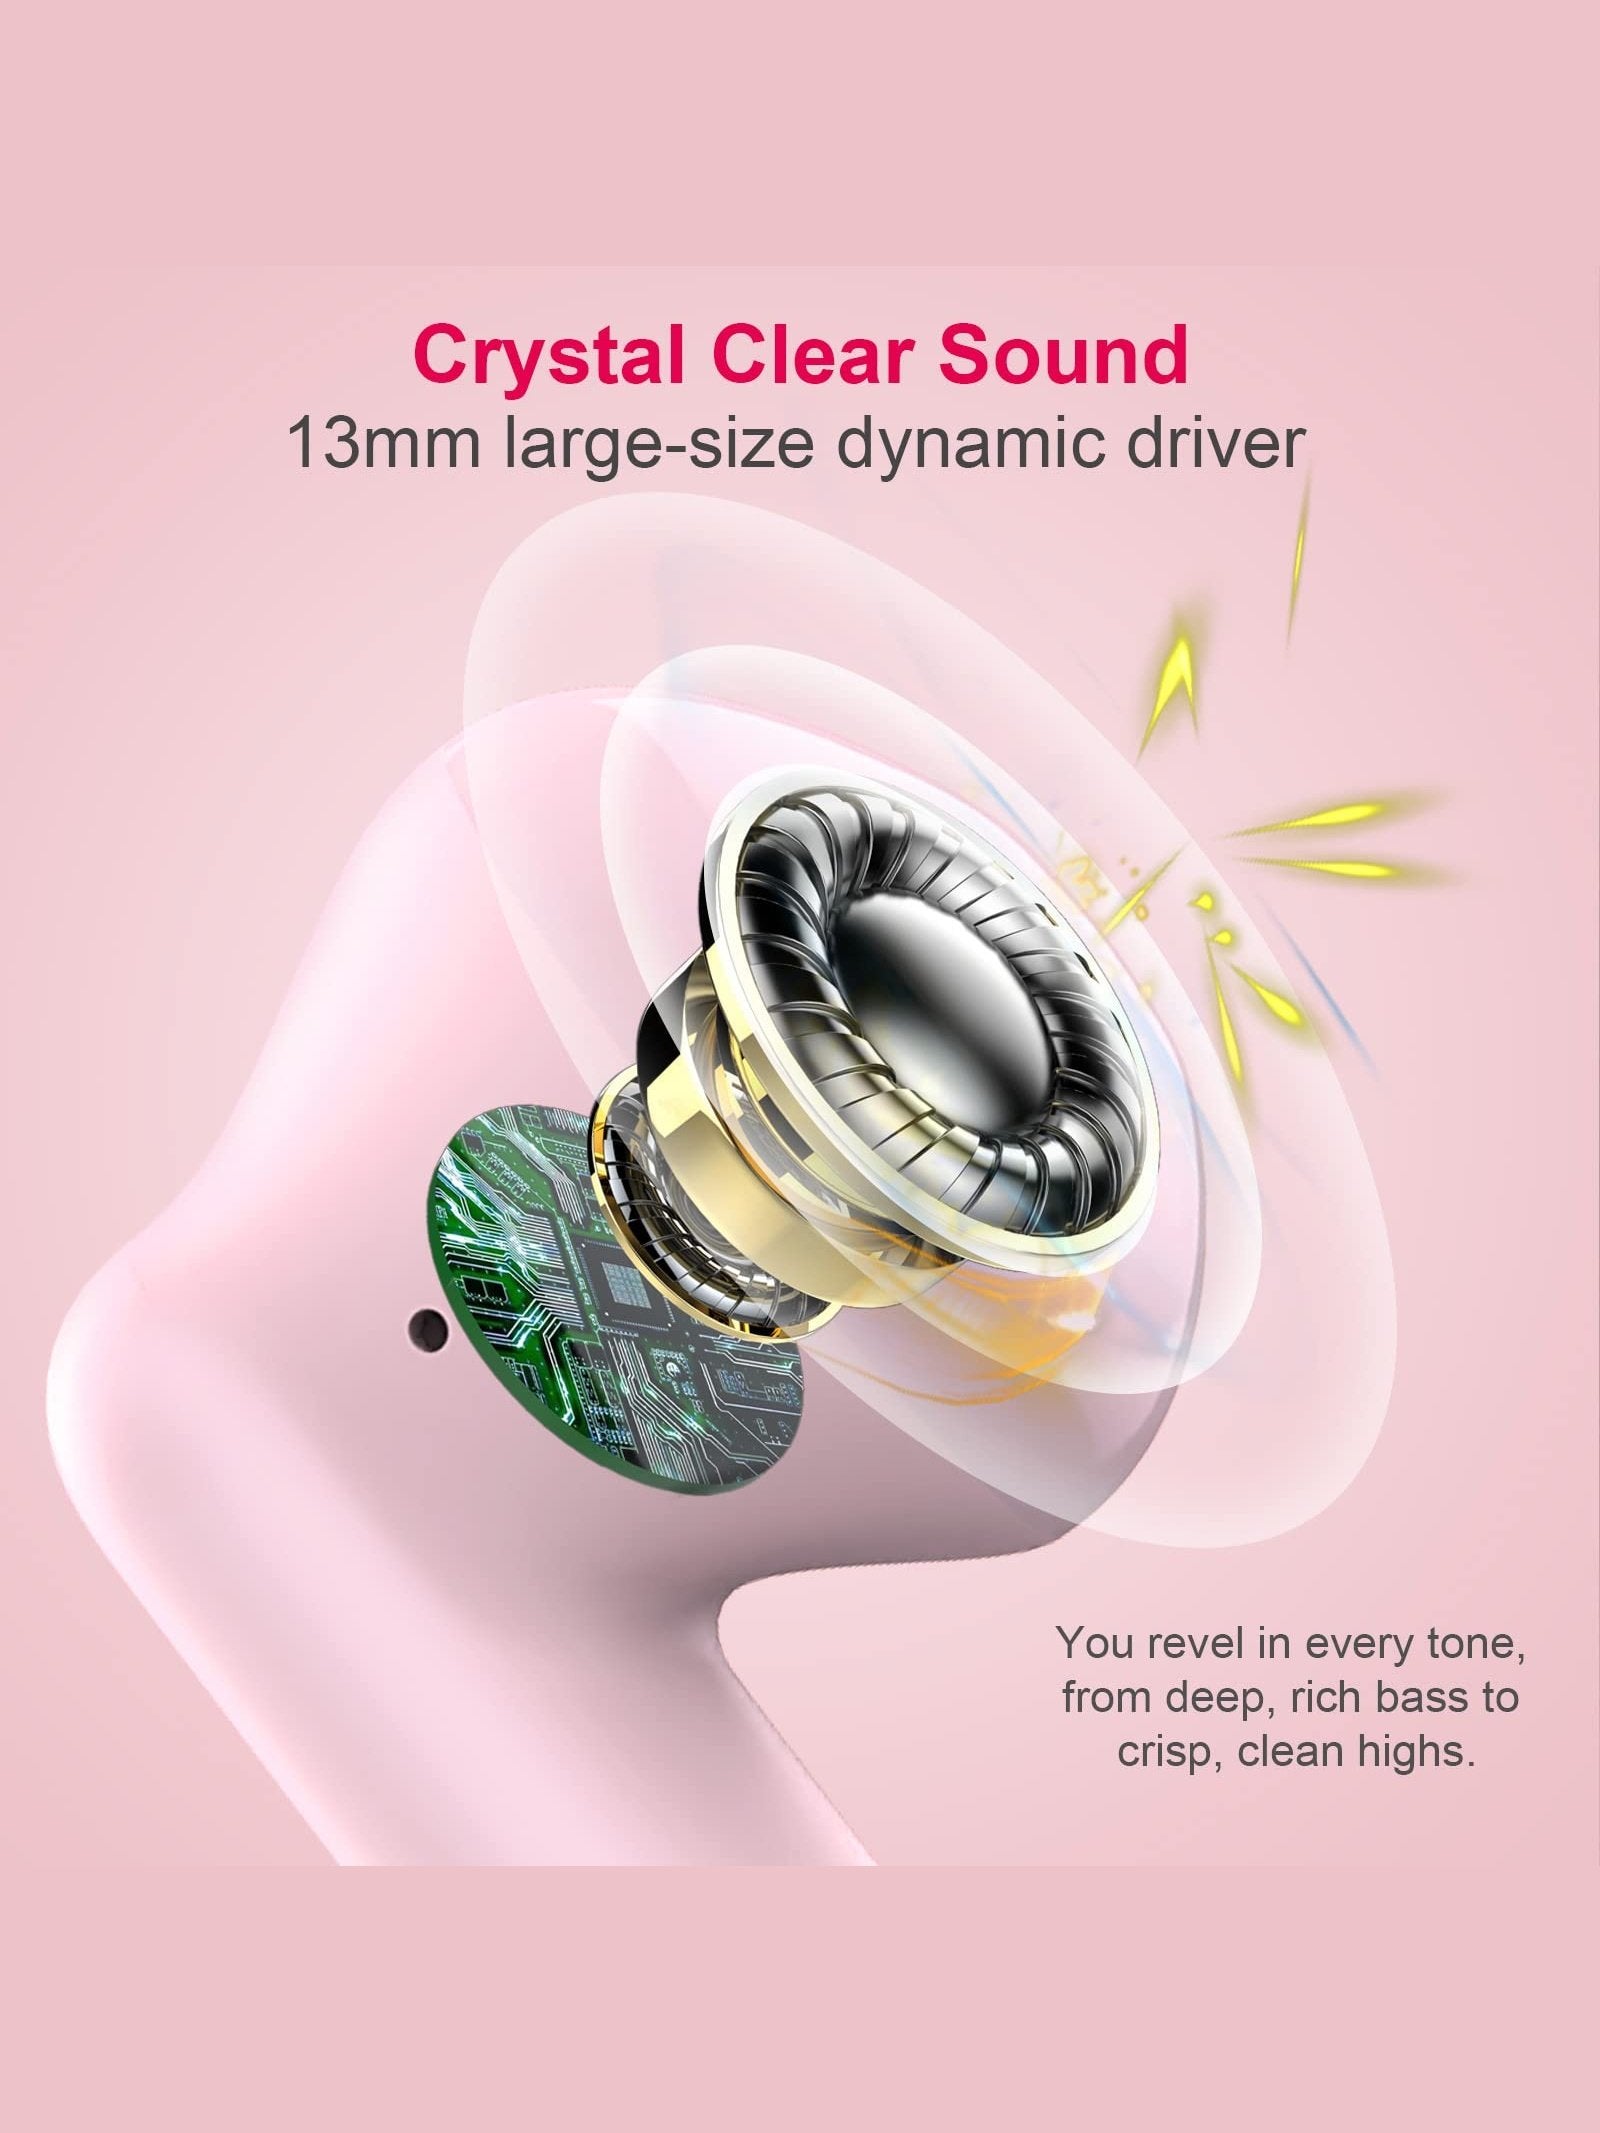 Wireless Earbuds, Bluetooth 5.3 Earbuds Stereo Bass, Bluetooth Headphones in Ear Noise Cancelling Mic, Earphones IP7 Waterproof Sports, 32H Playtime USB C Mini Charging Case Ear Buds for Android iOS